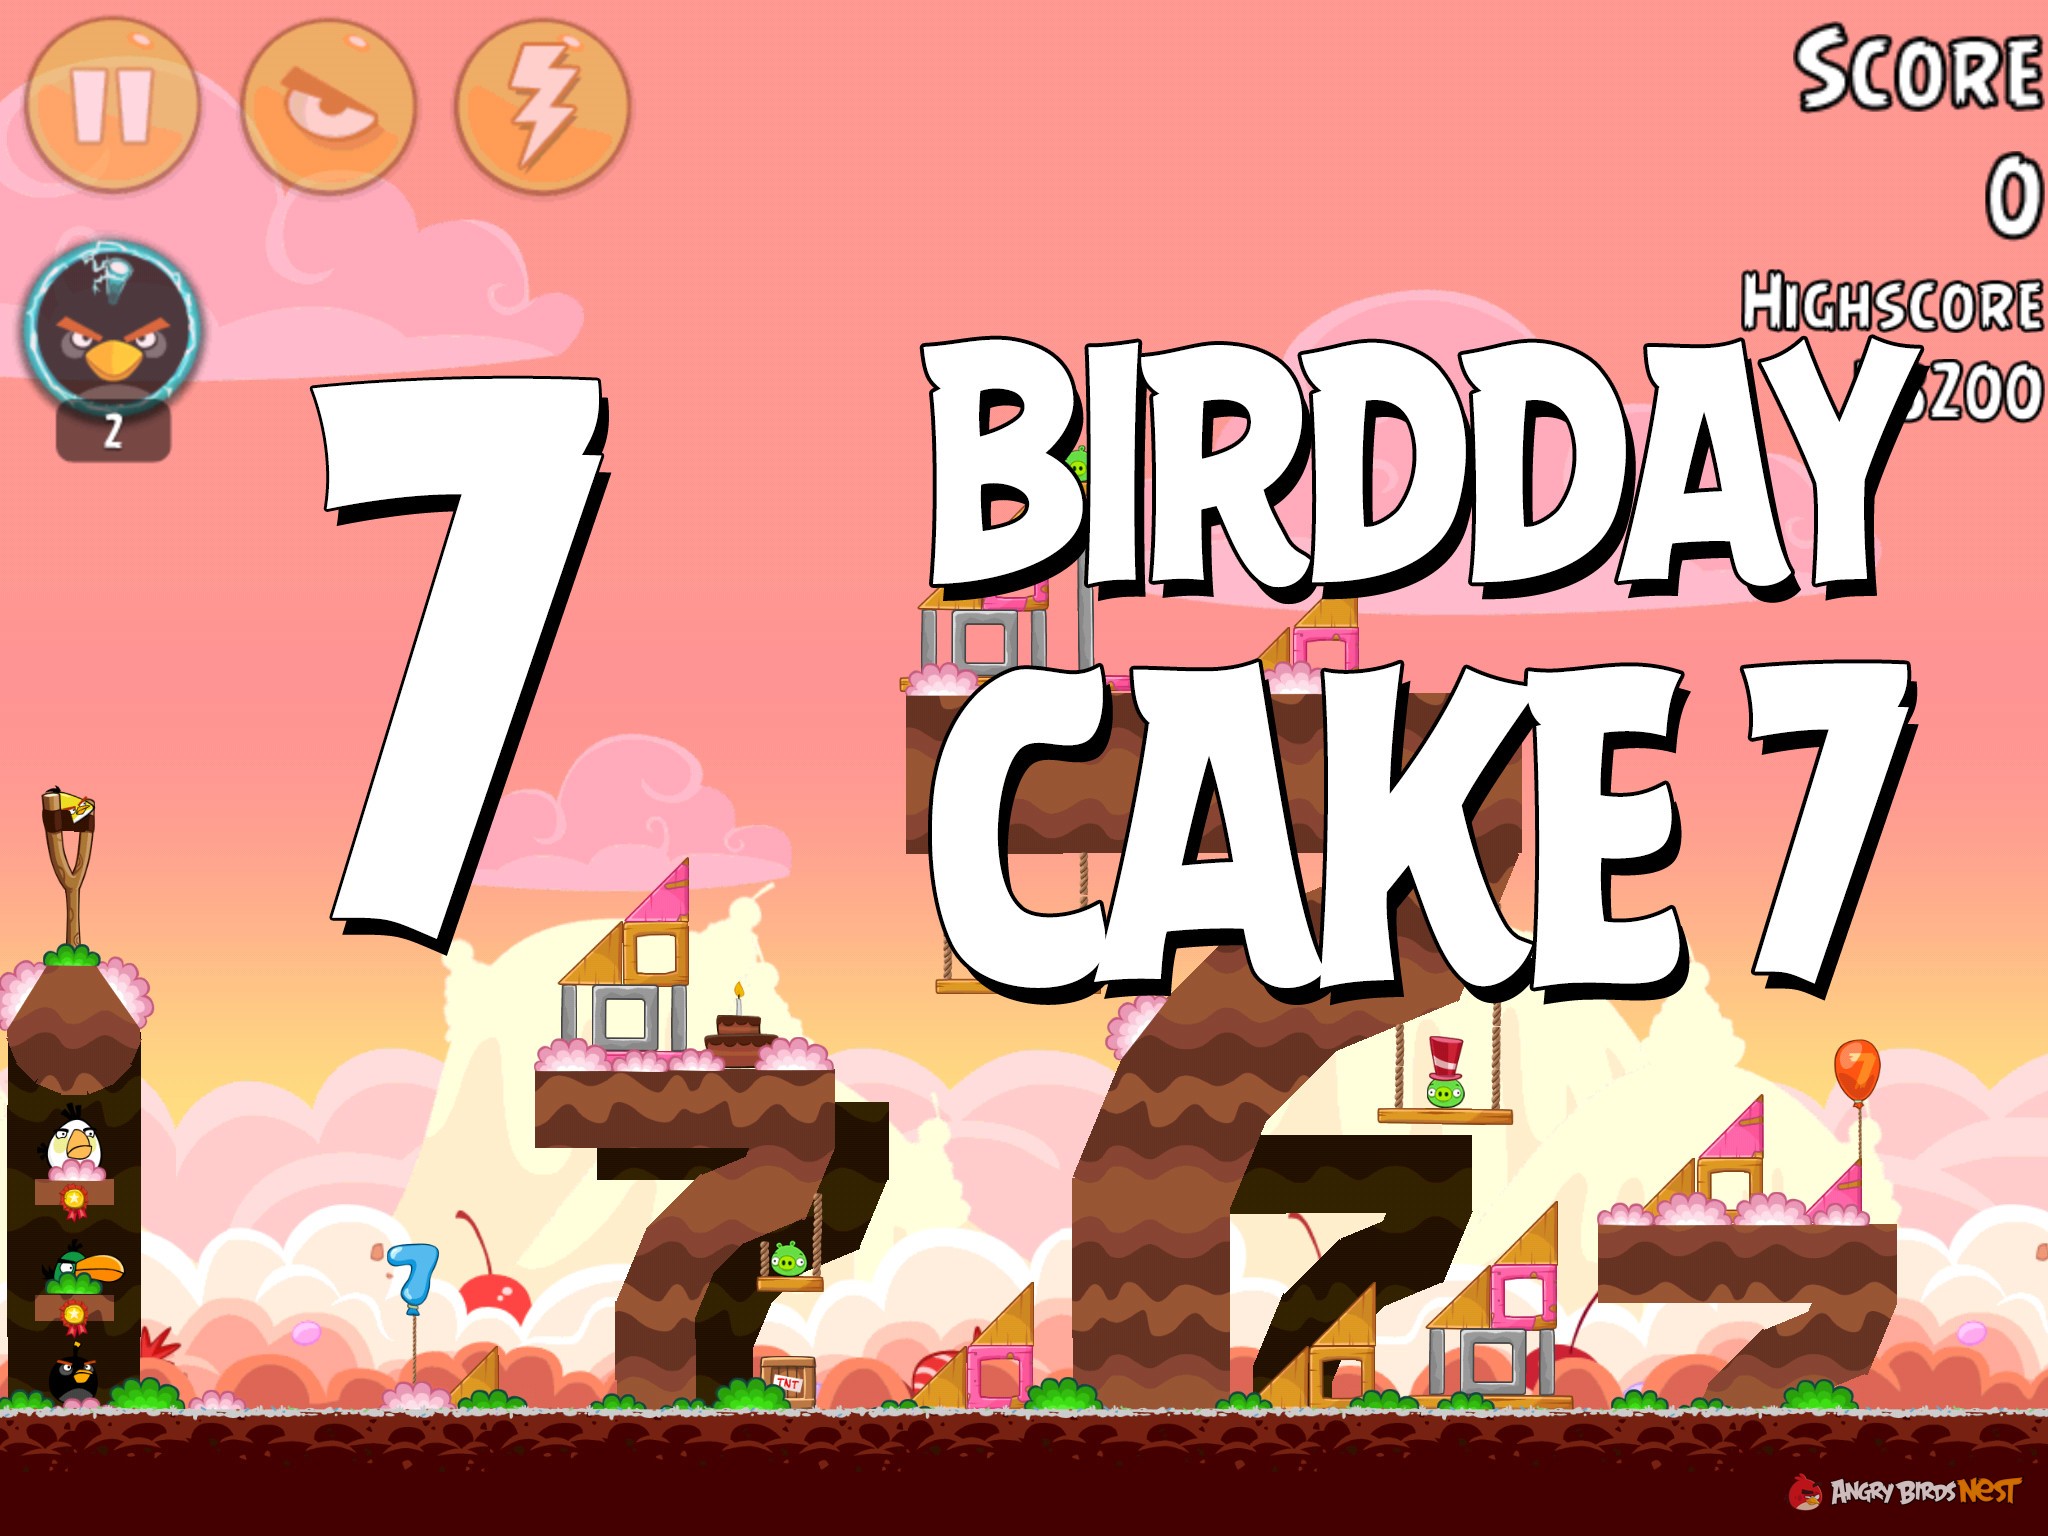 Angry-Birds-Birdday-Party-Cake-7-Level-7